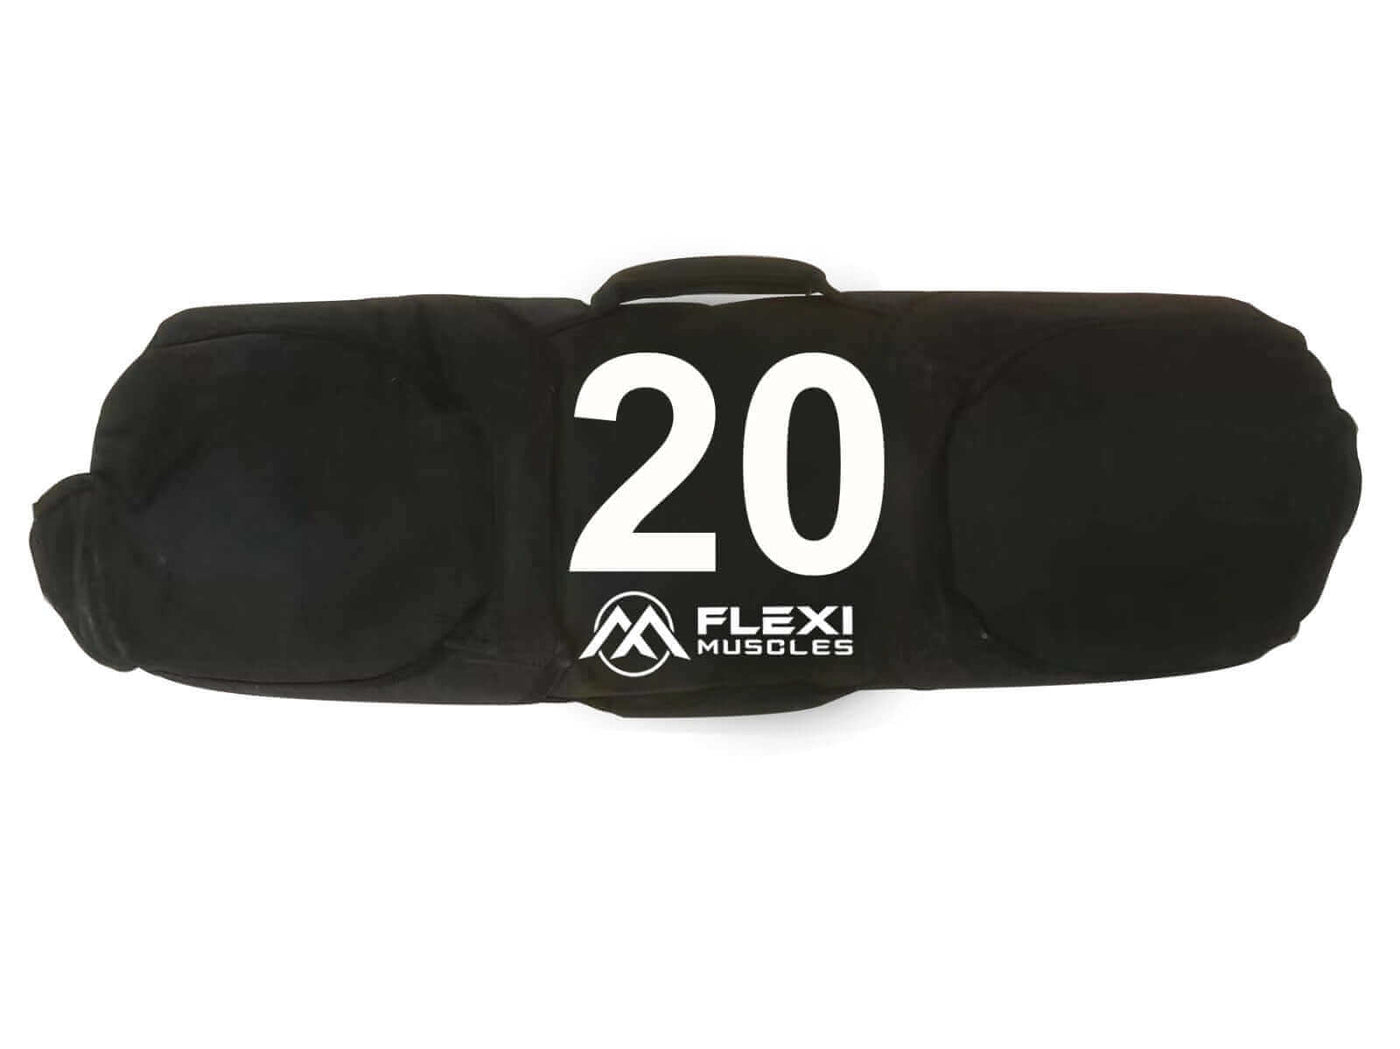 Flexi Muscles – Adjustable Sandbags, Heavy Duty Bag with Filler bags.